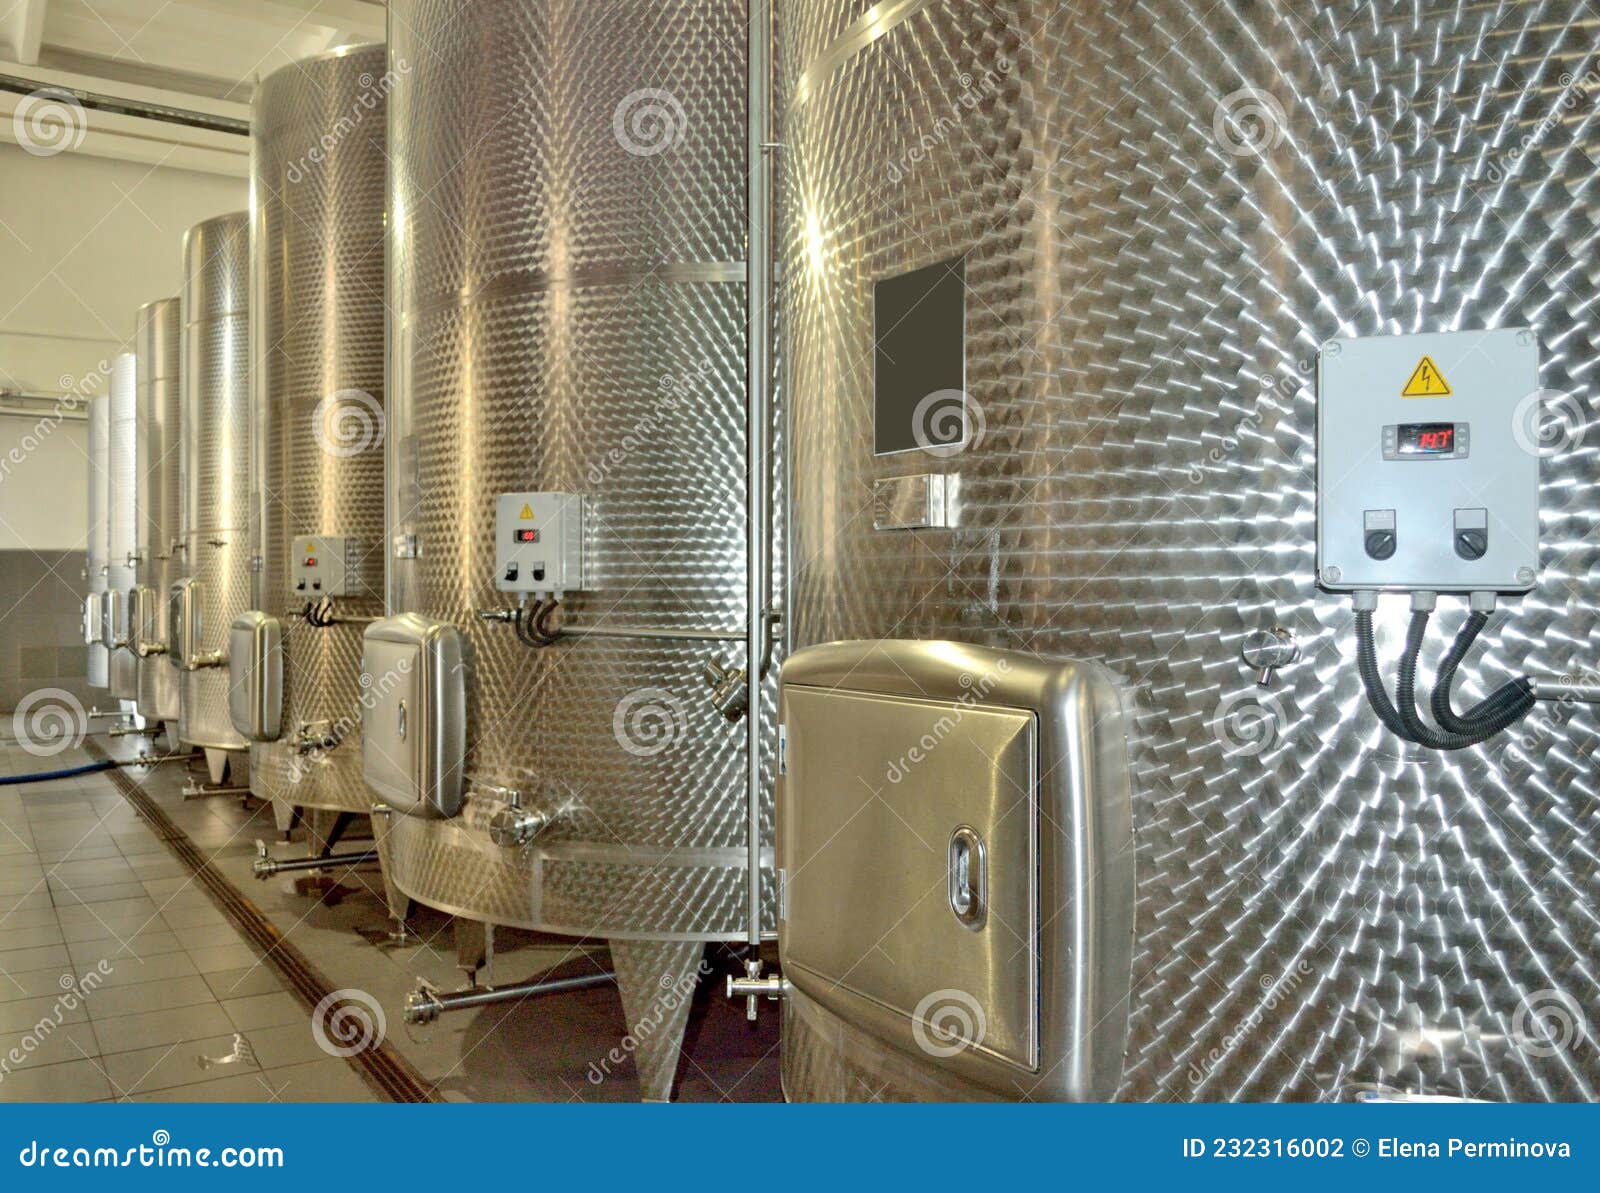 wine tanks at the winery